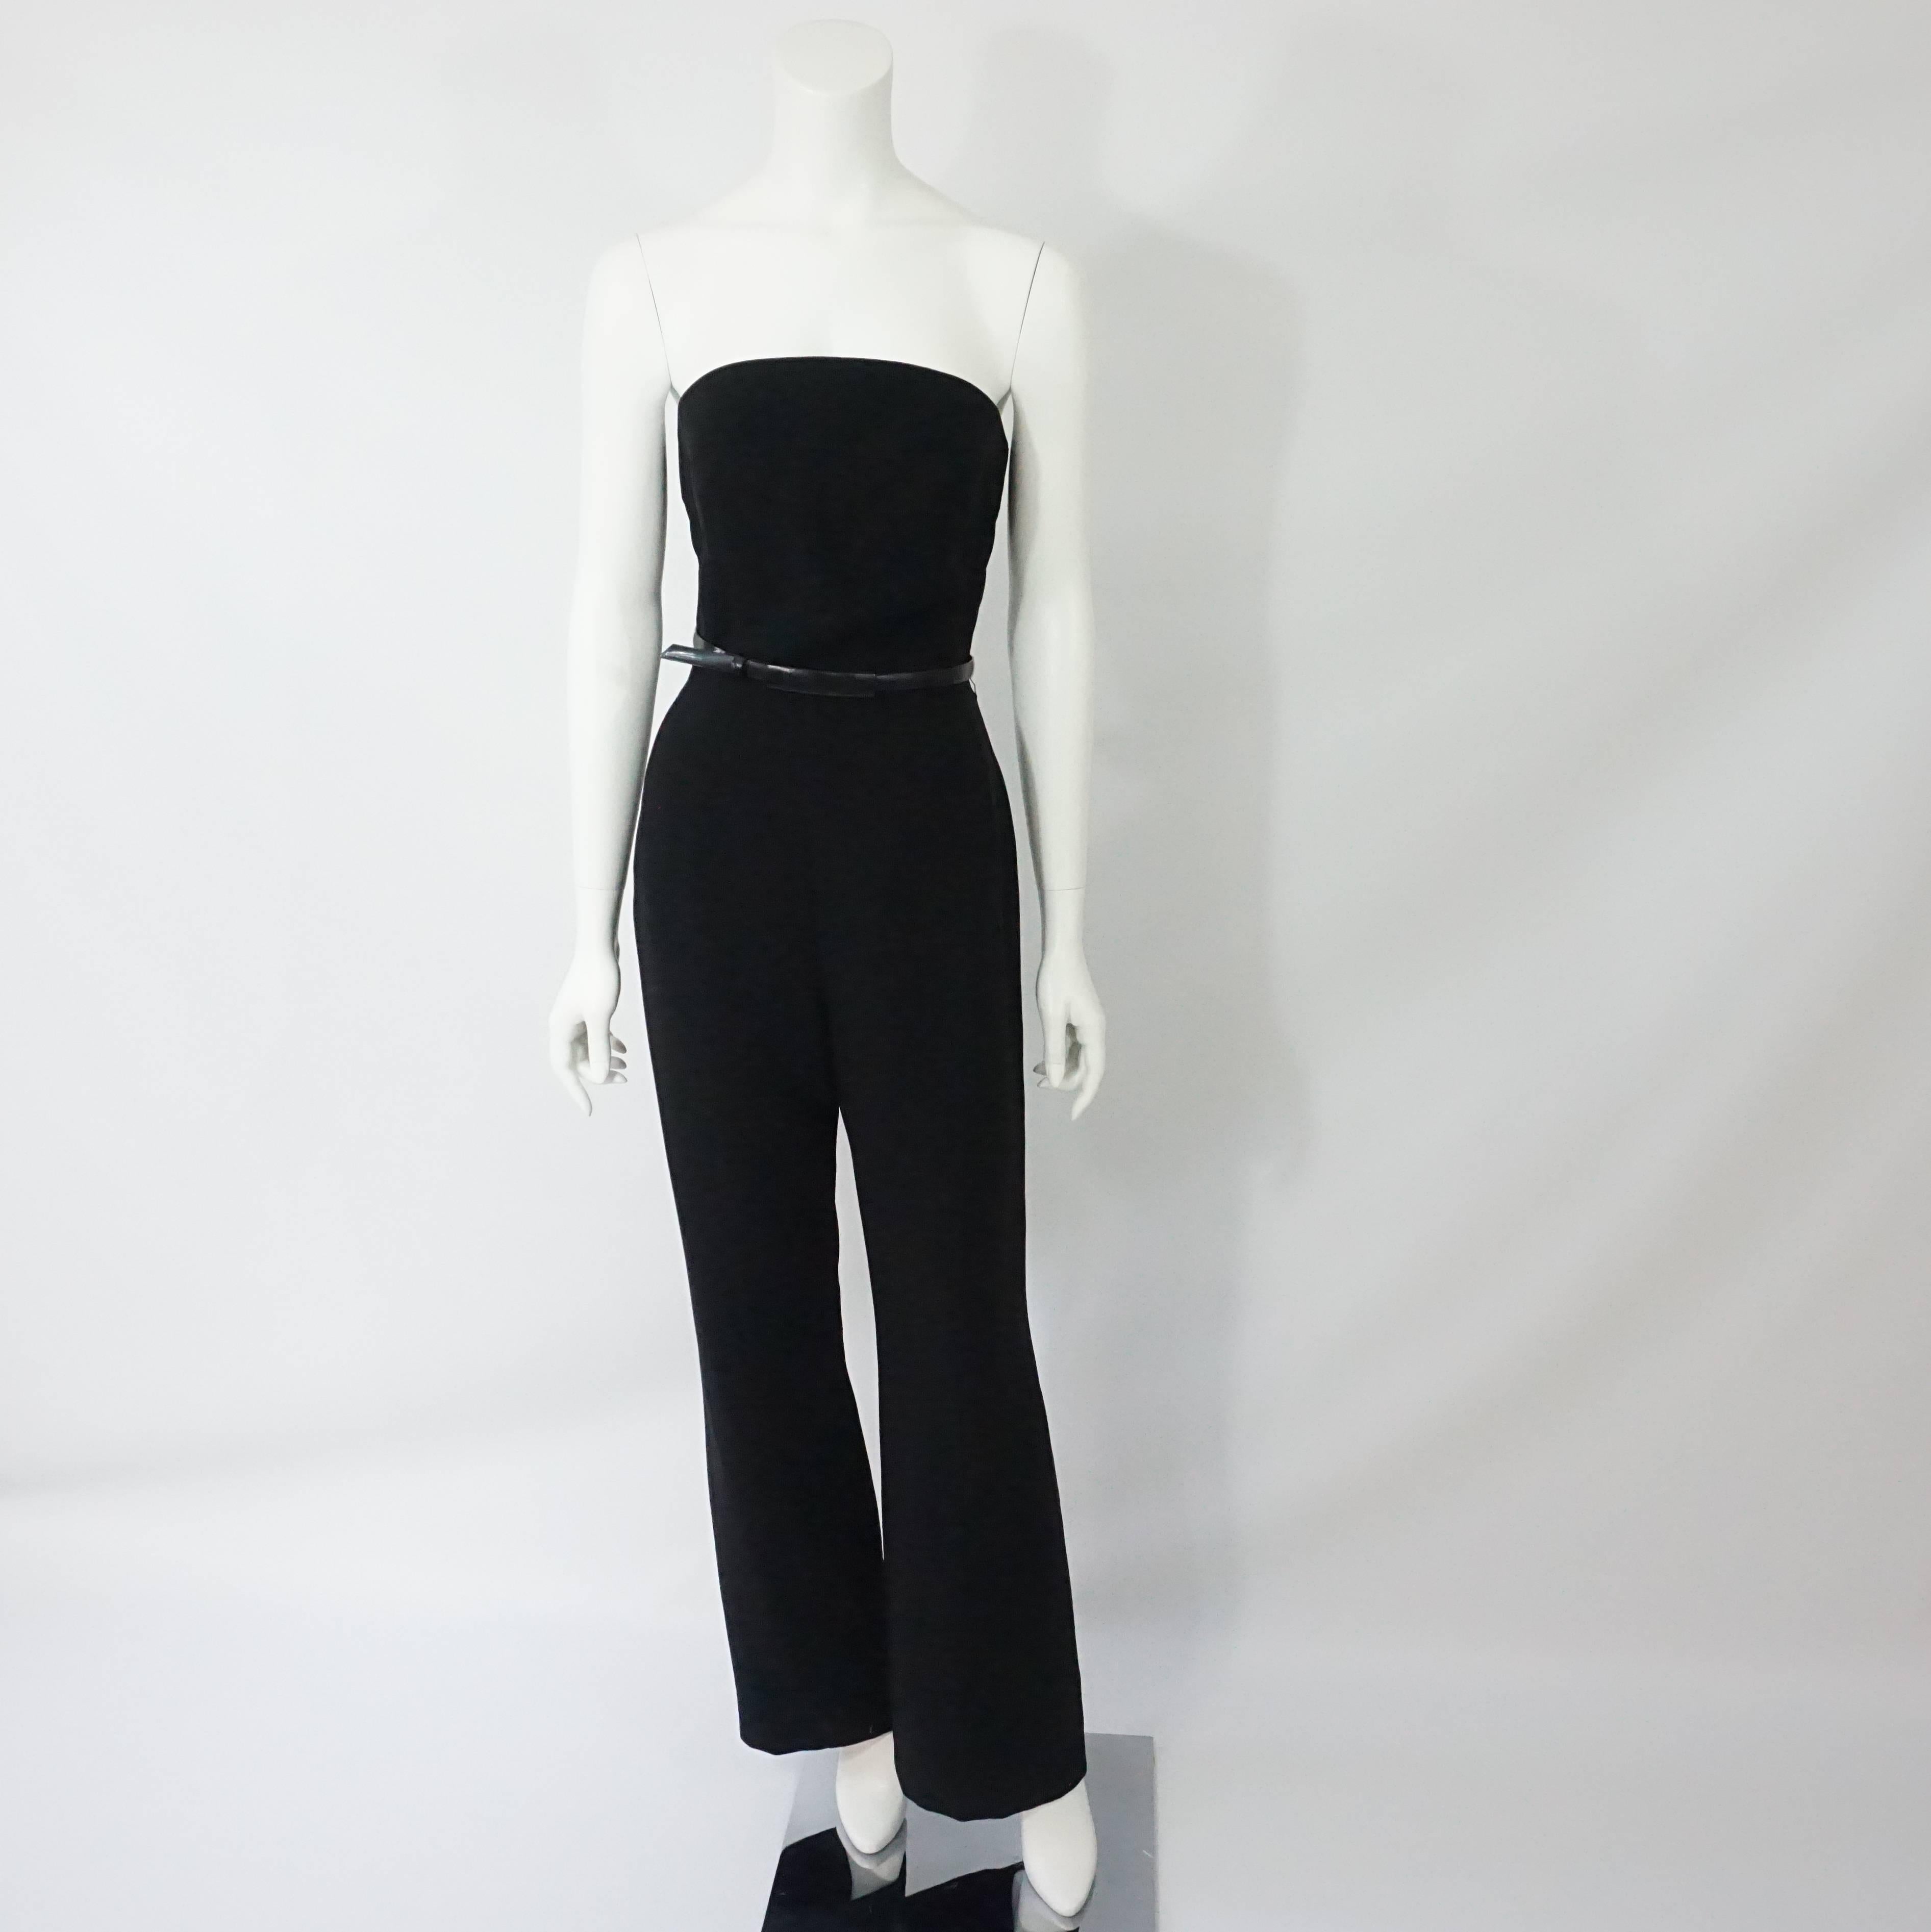 Thierry Mugler Black Strapless Jumpsuit w/ Lace Soutache Jacket-40 Circa 80's This amazing and collectible Thierry Mugler piece is not only timeless but quite a show stopper. The ensemble also comes with a thin leather belt. This outfit is in